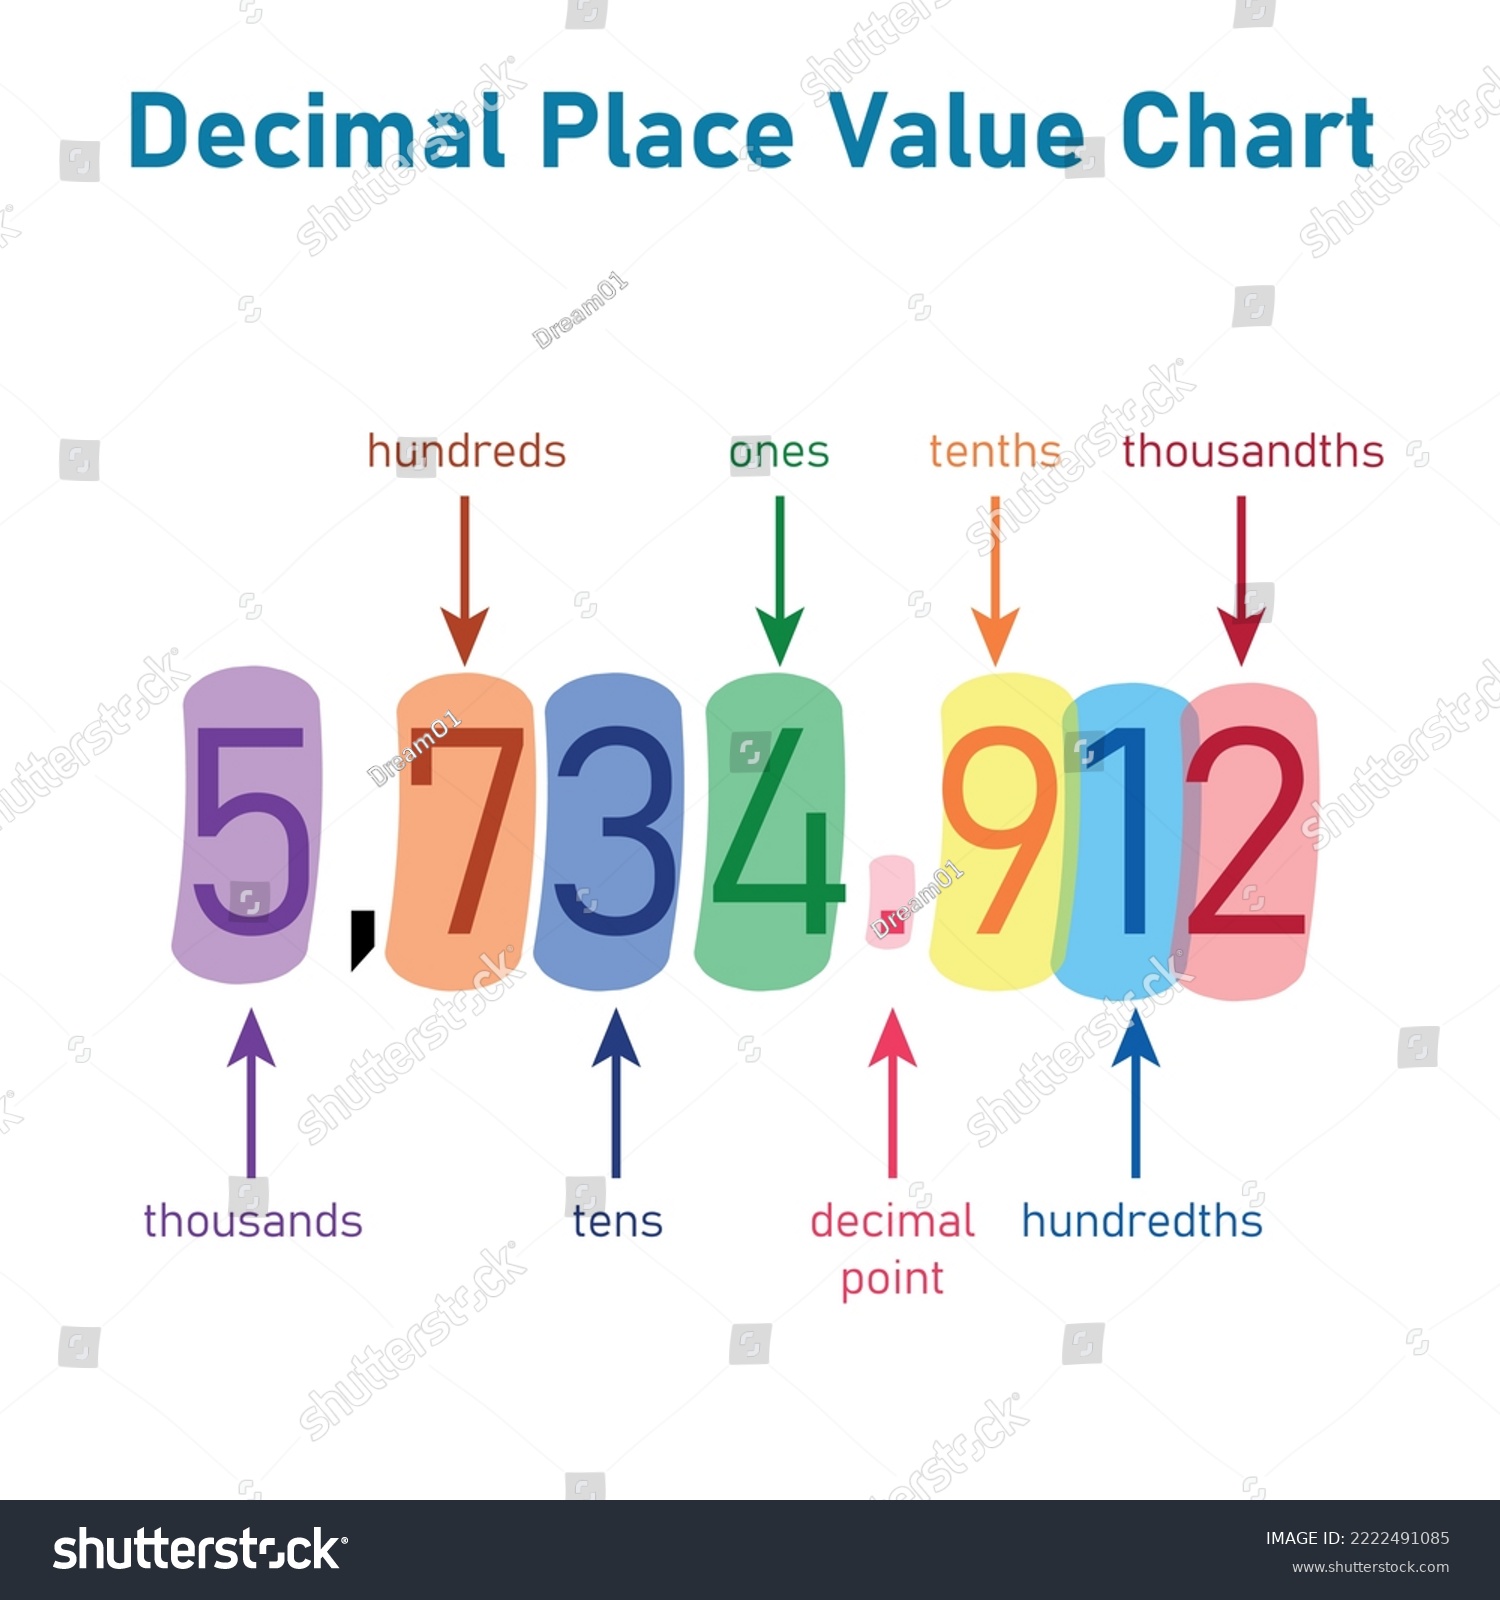 Decimal place value chart. Thousands, hundreds, tens, decimal point, tenths, hundredths and thousandths. Vector illustration isolated on white background. #2222491085